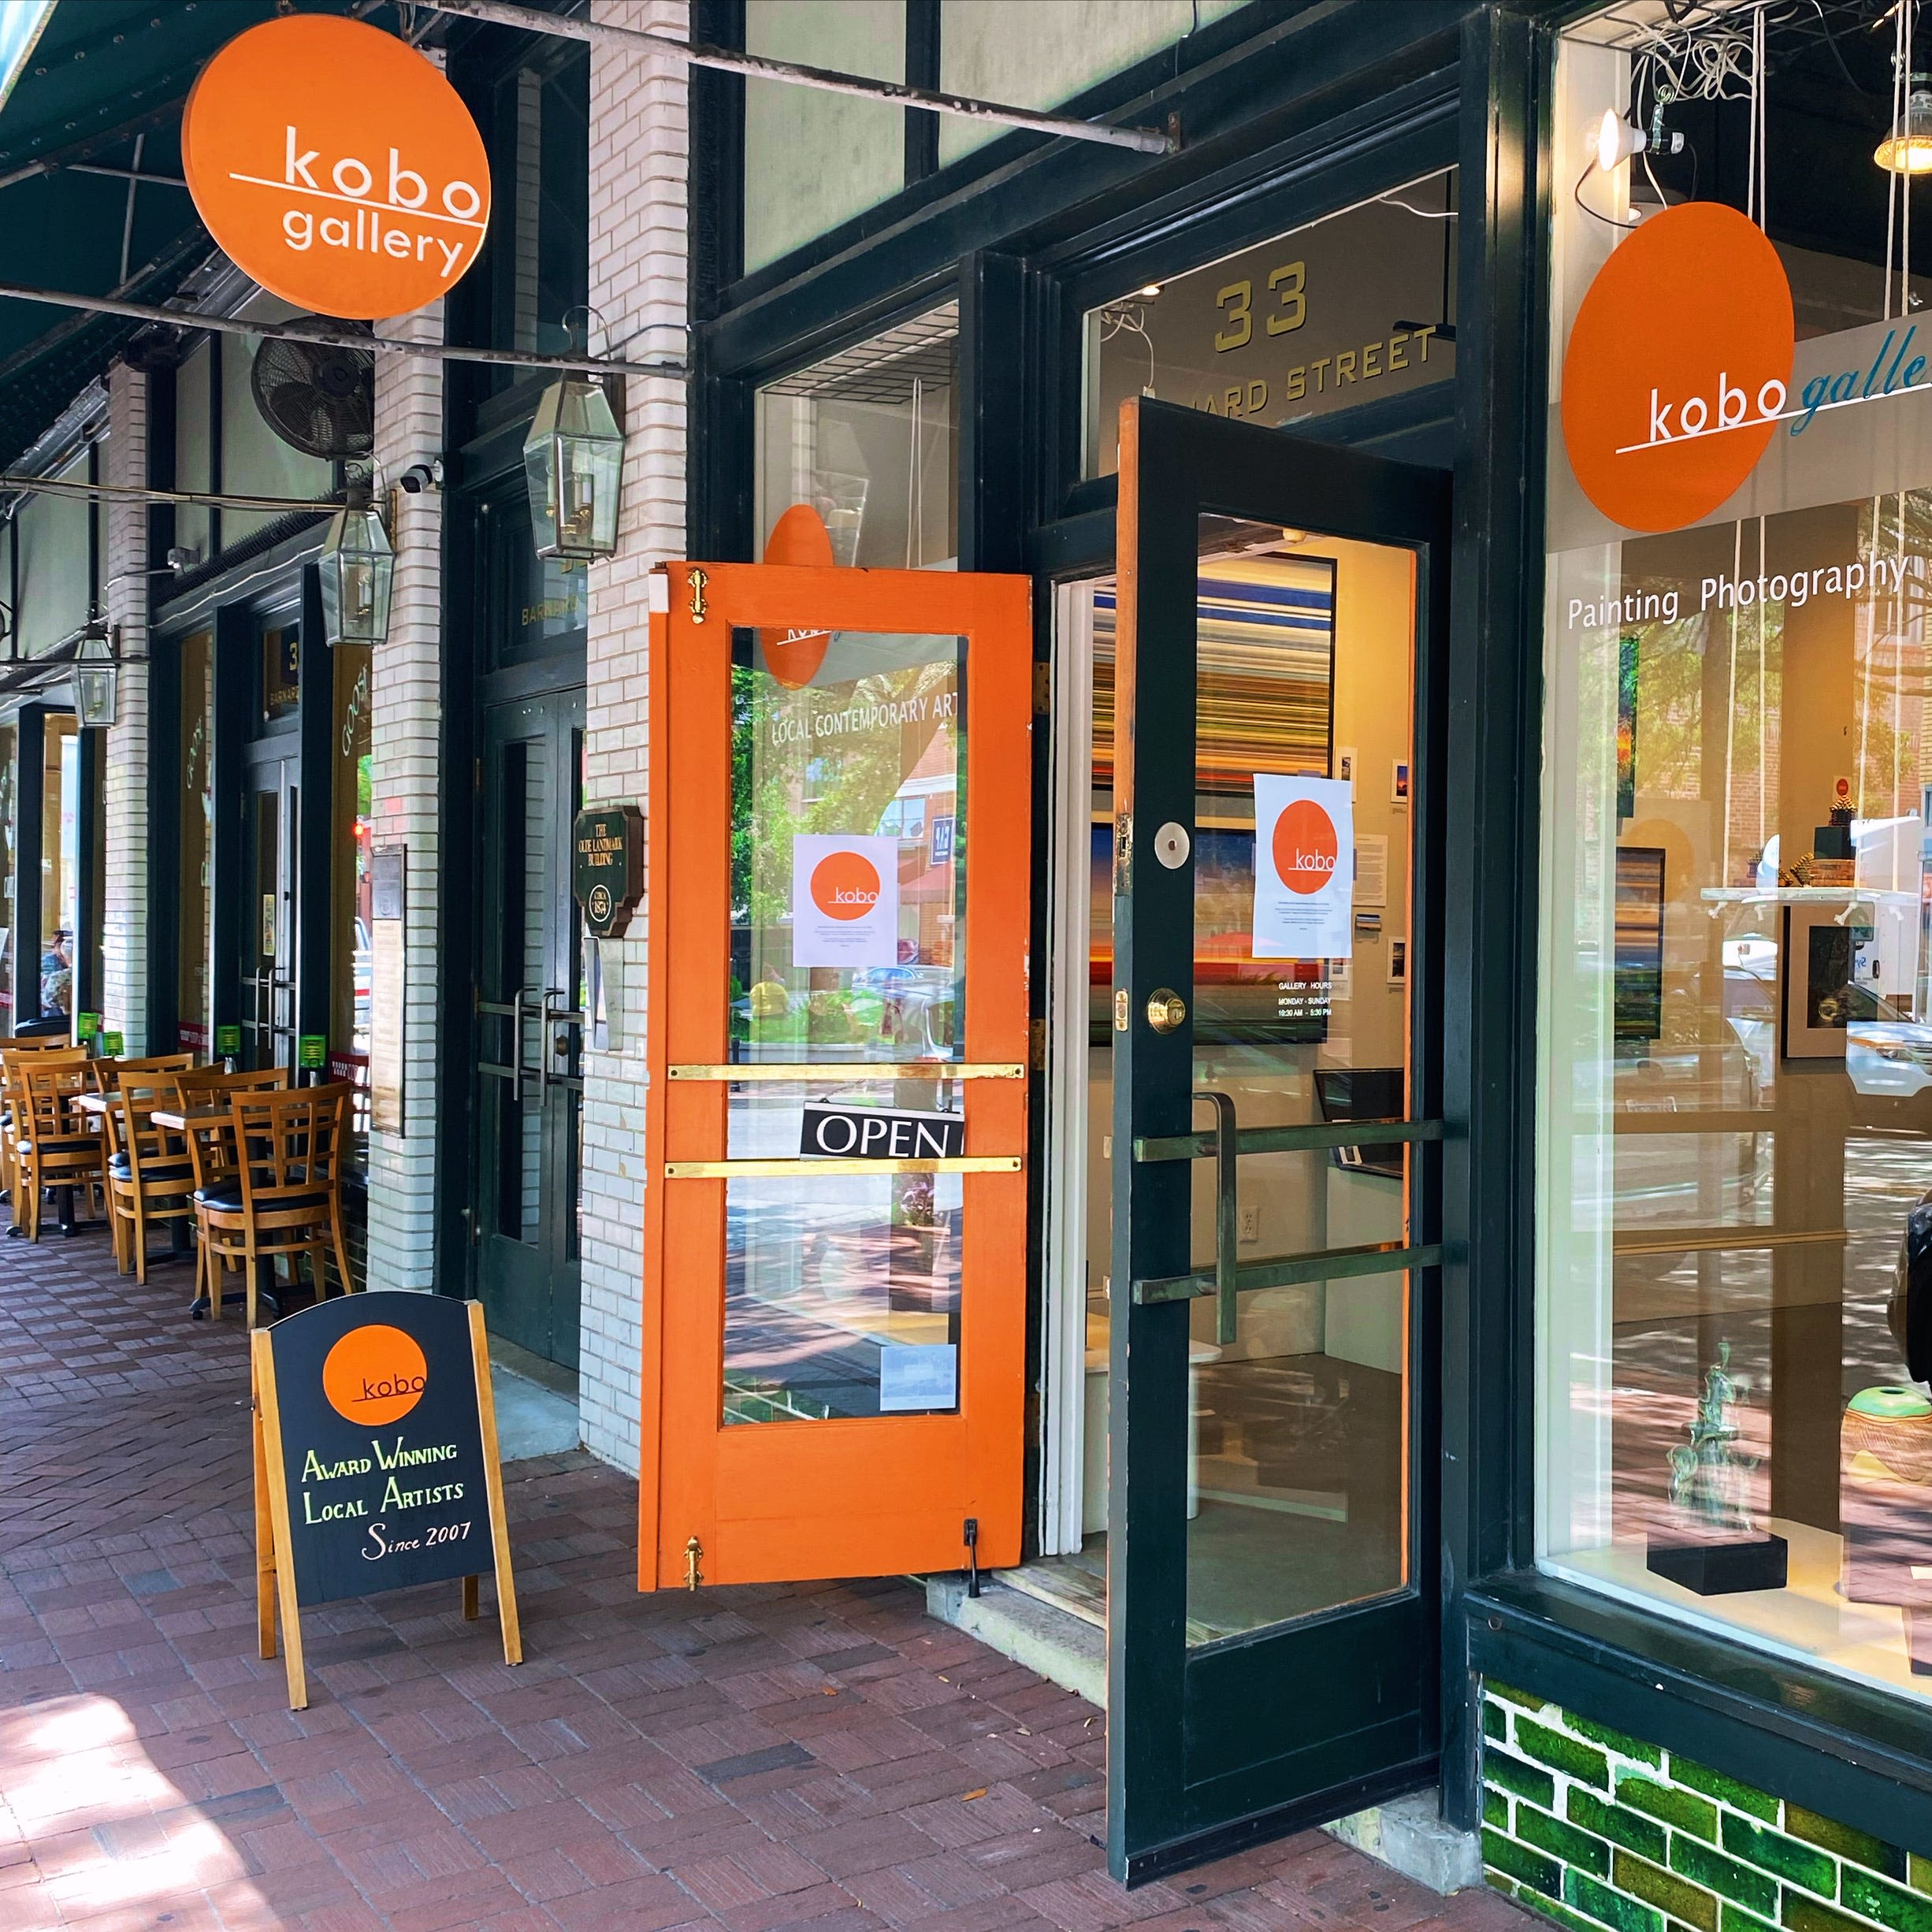 Savannah's artist co-op Kobo Gallery announces it will close its doors at the end of June